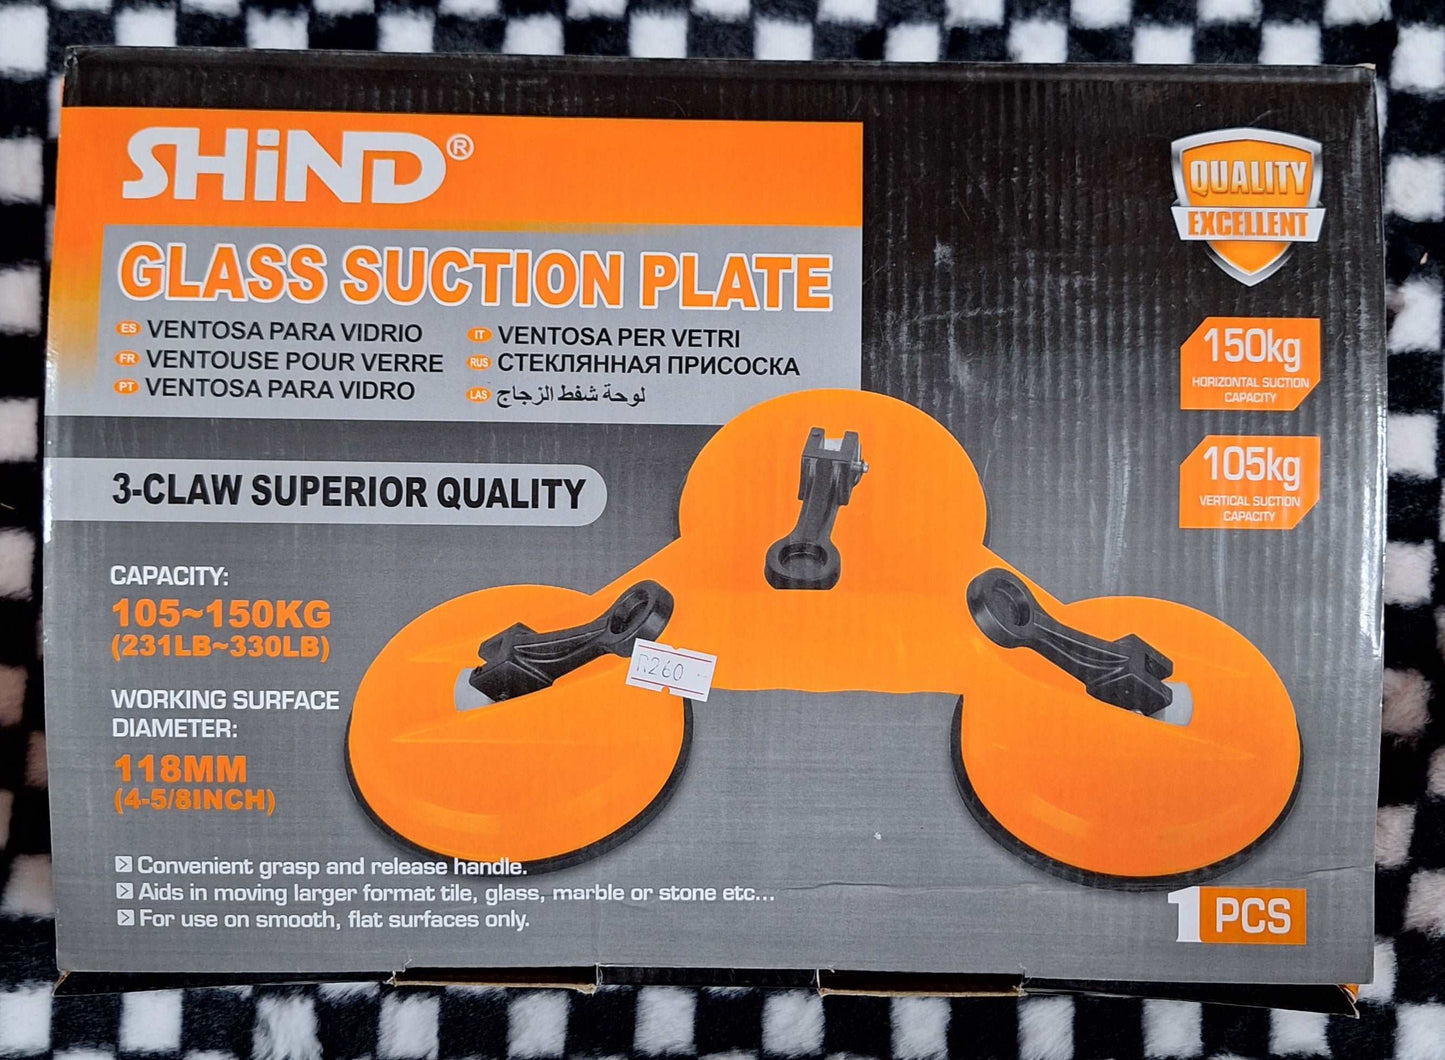 SHIND 3 Claw Glass Suction Plate